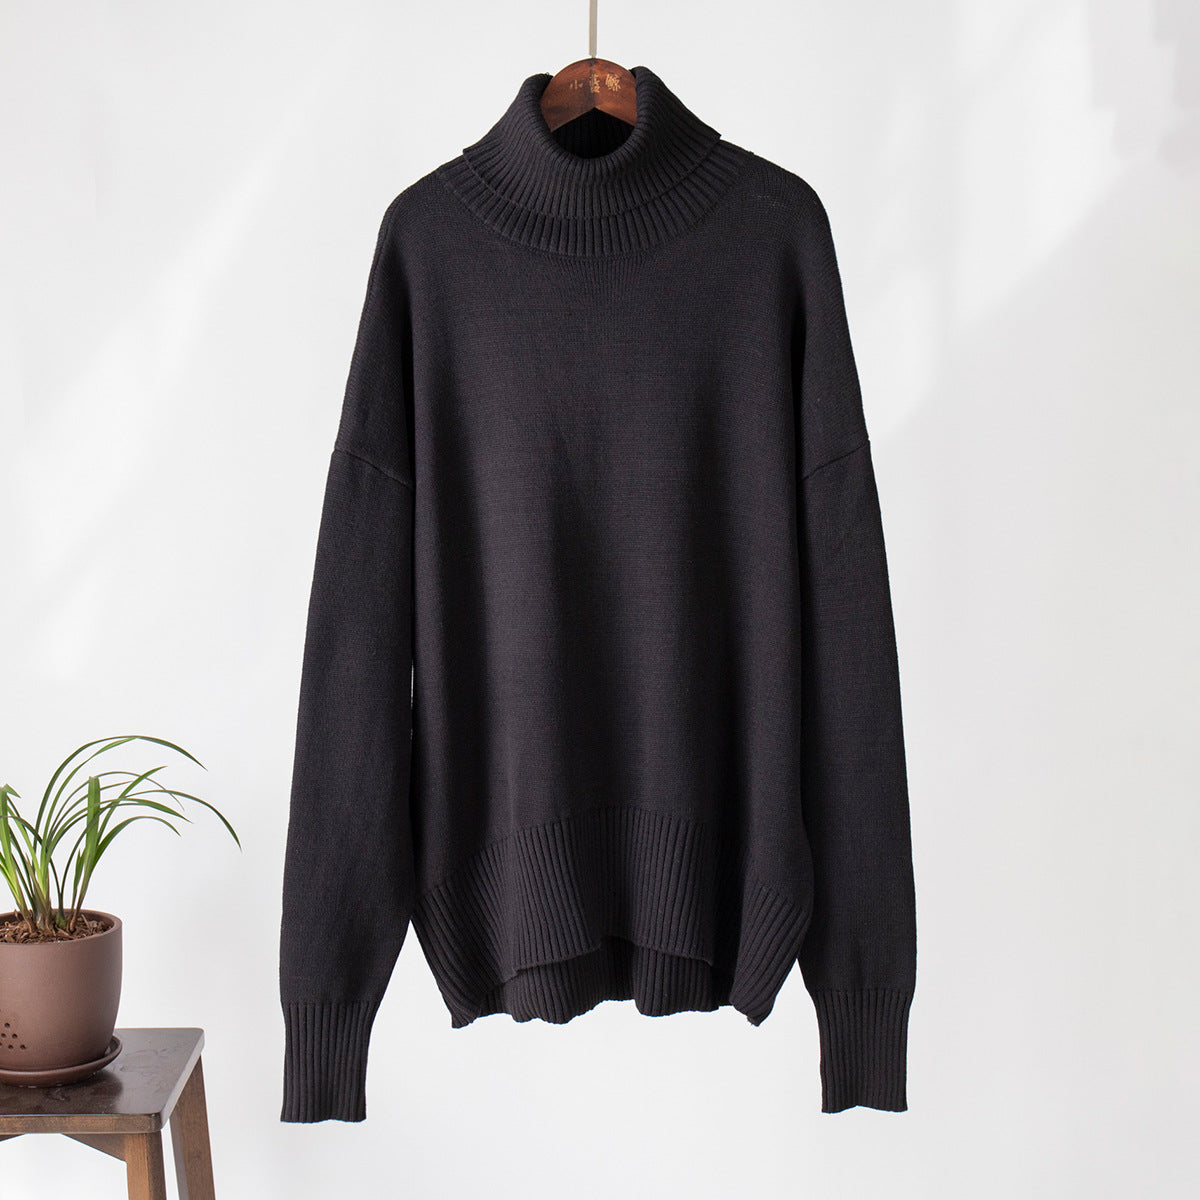 Eve - Pull-over en tricot lâche